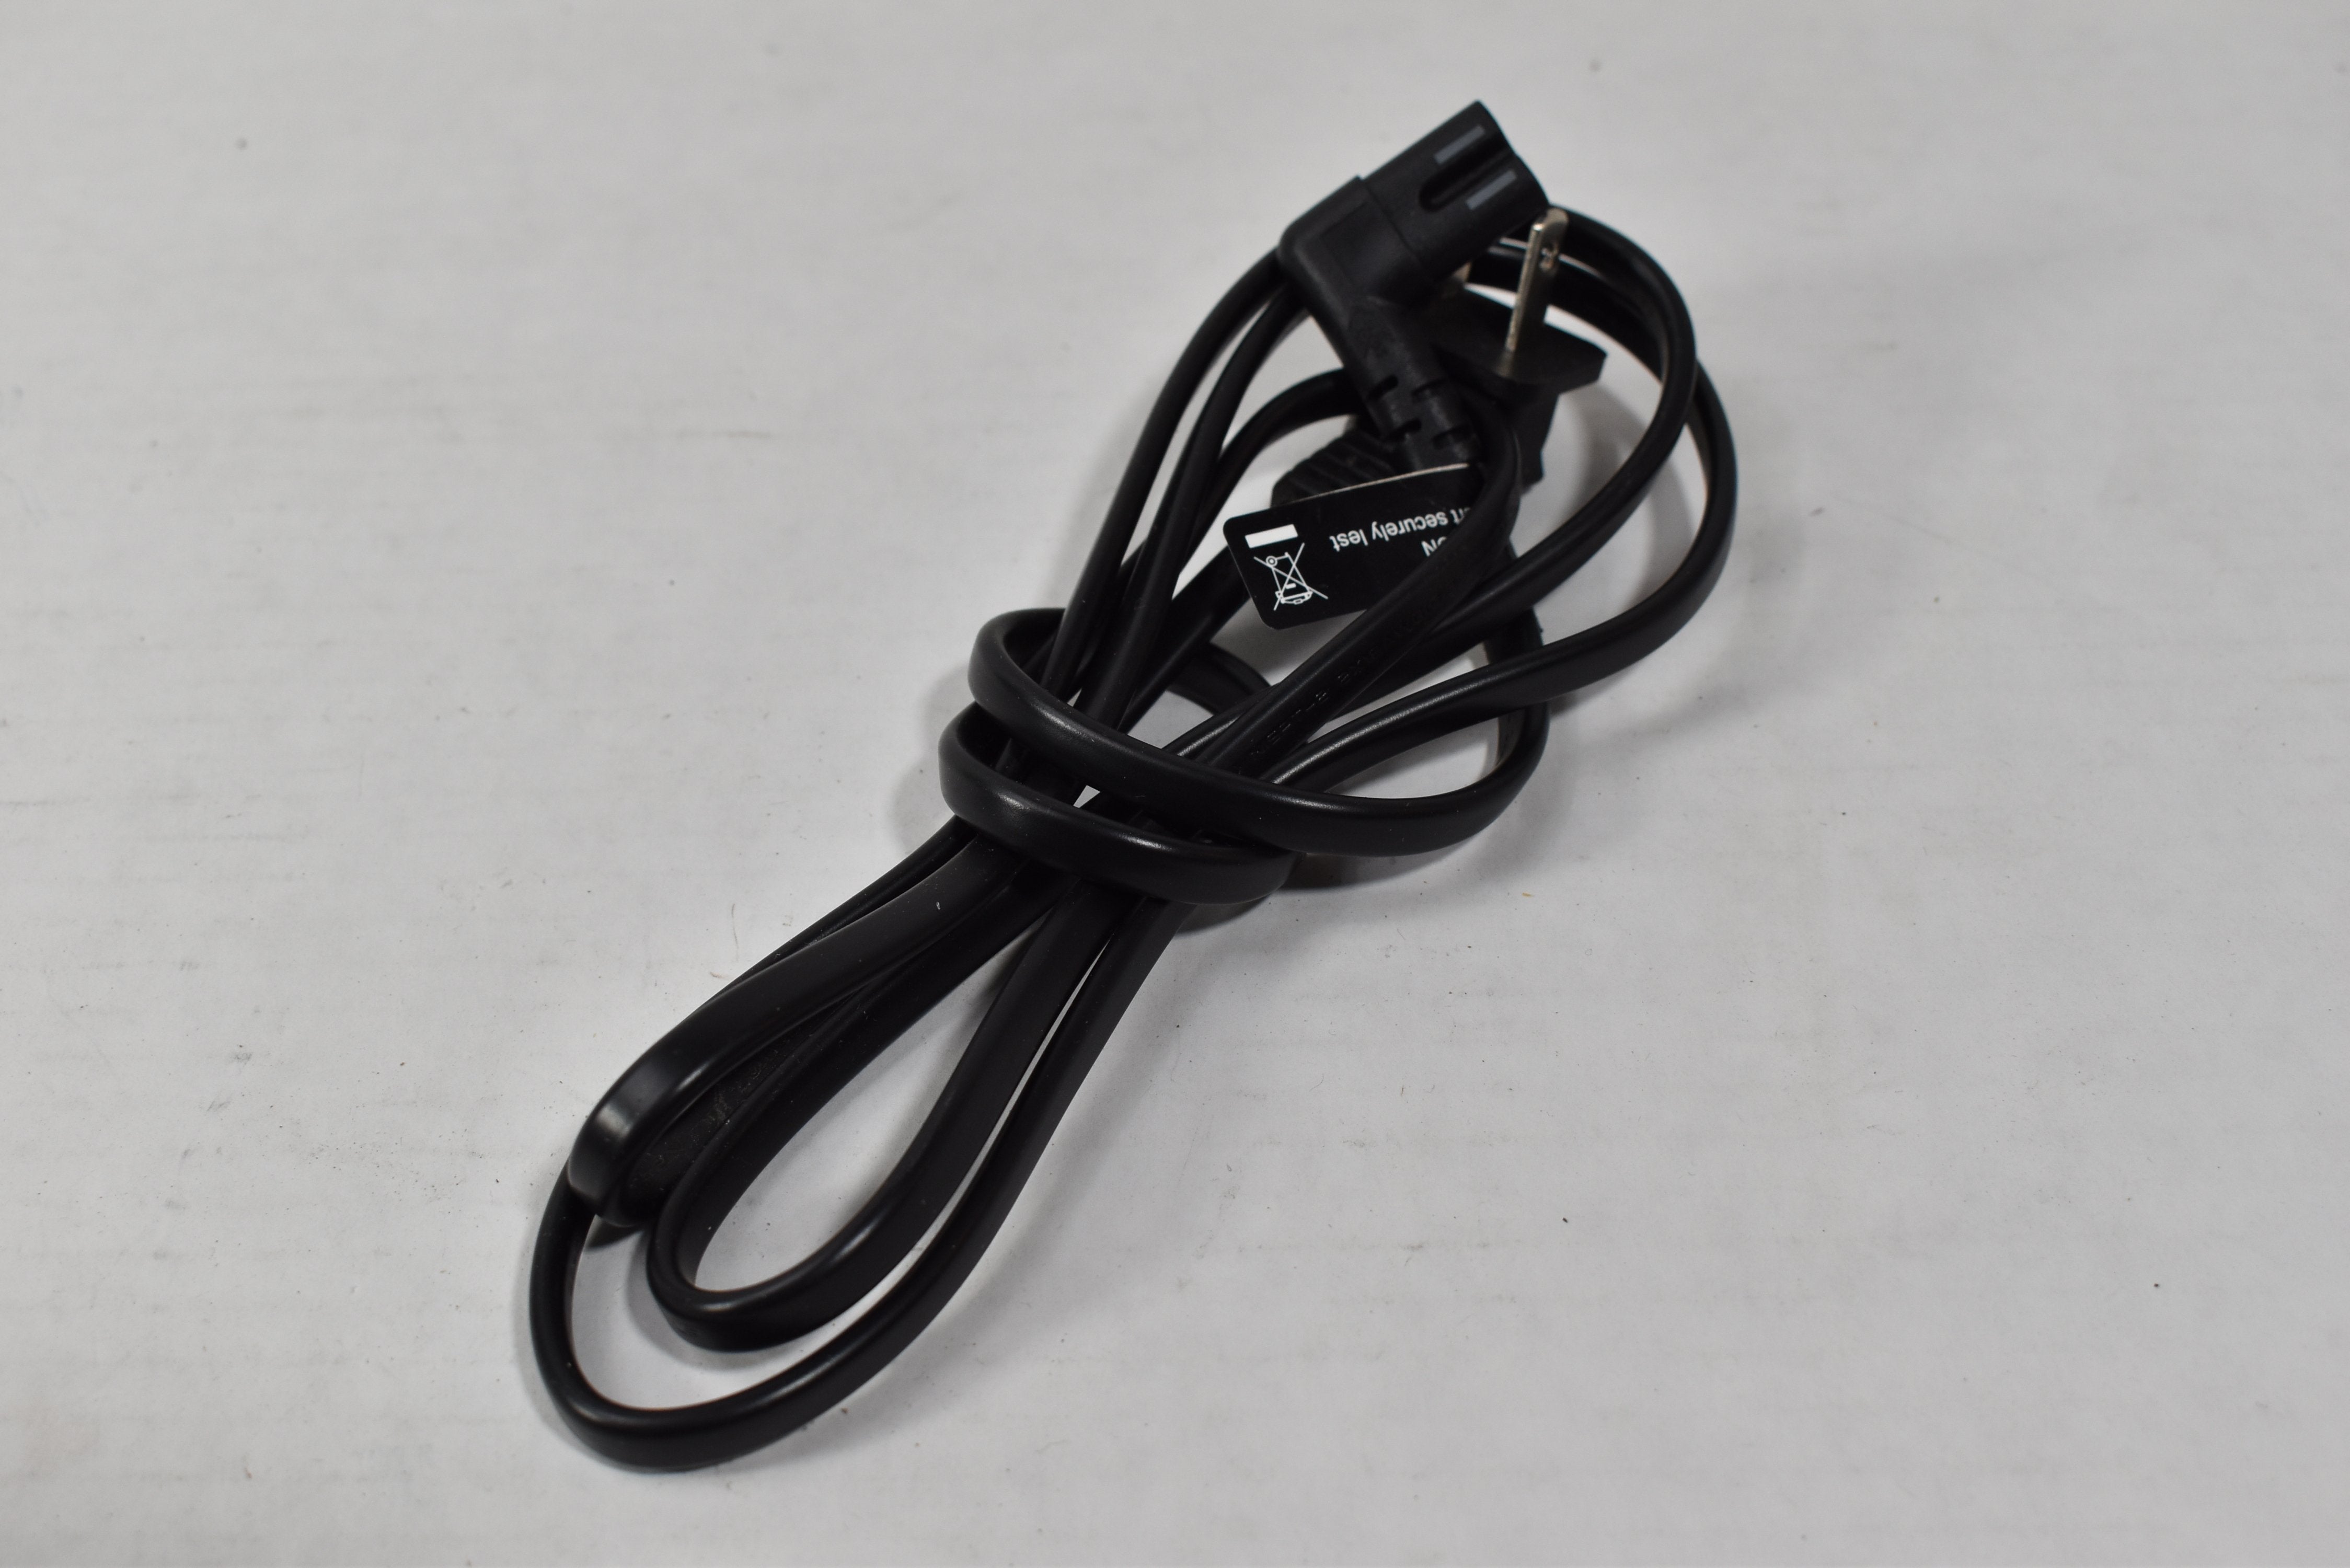 Samsung Tv Power Cord Tested